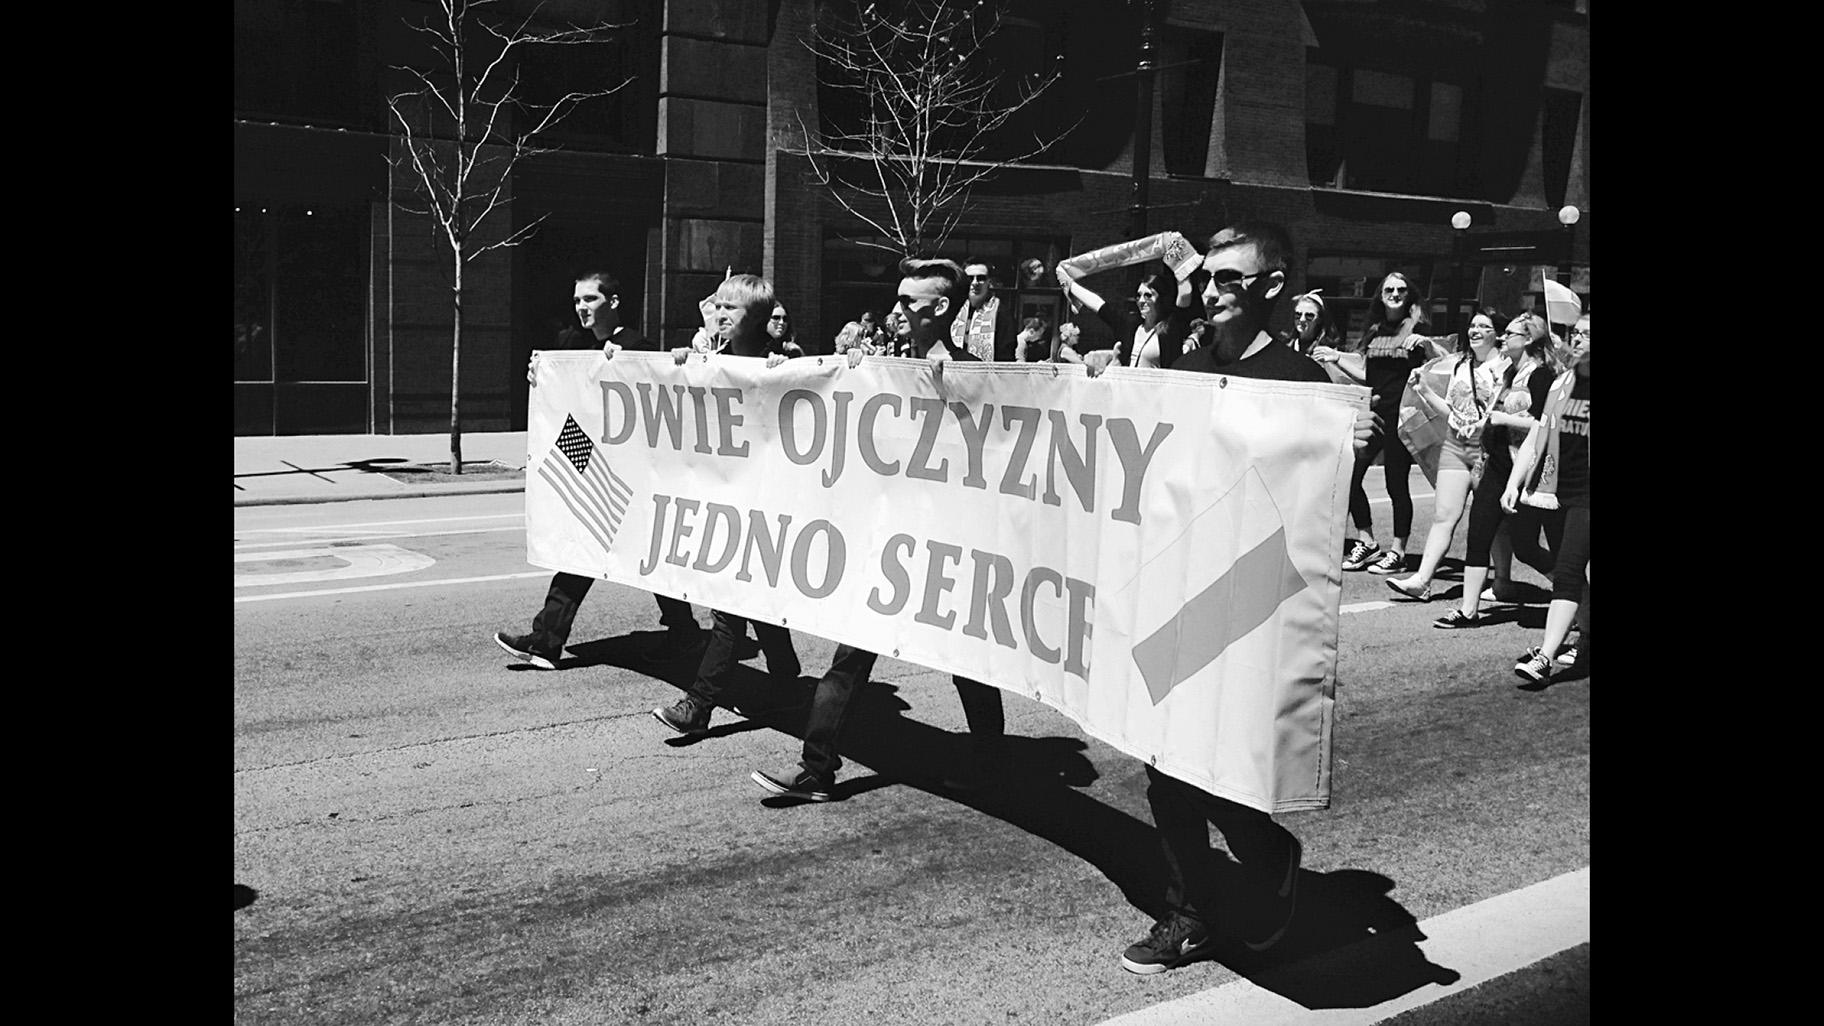 Polish Constitution Day Parade in Chicago’s Loop, May 2, 2015. The banner reads, in English, “Two homelands, one heart,” expressing the dual nature of Polonia. (Photograph by Dominic Pacyga)